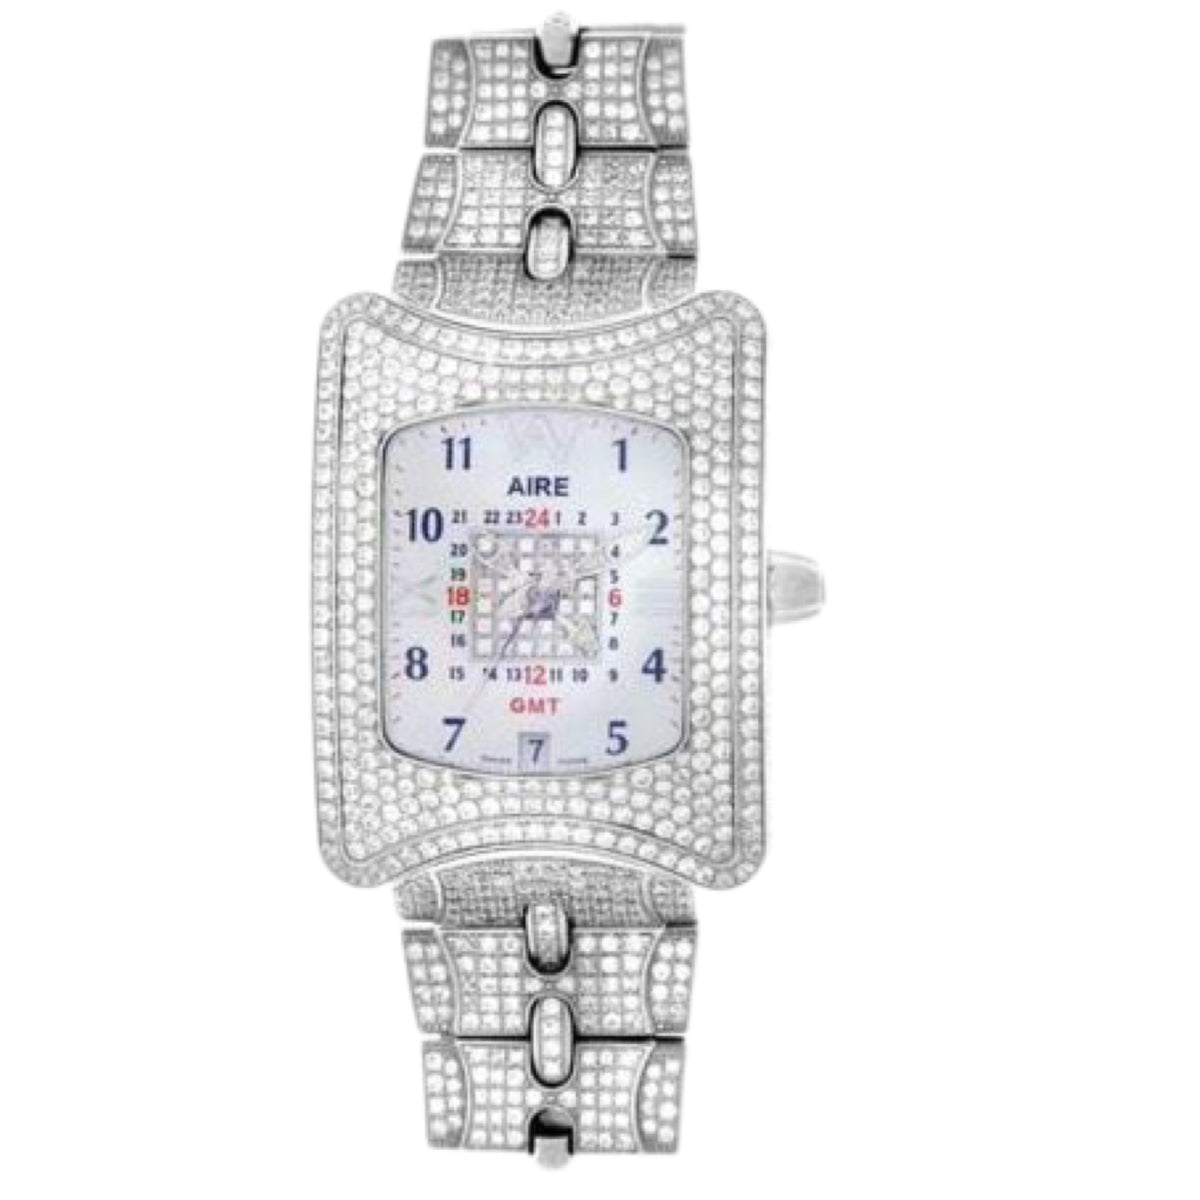 Watch - Aire Traveler II GMT Swiss Made Automatic Full Diamond Unisex Watch For Men And Women